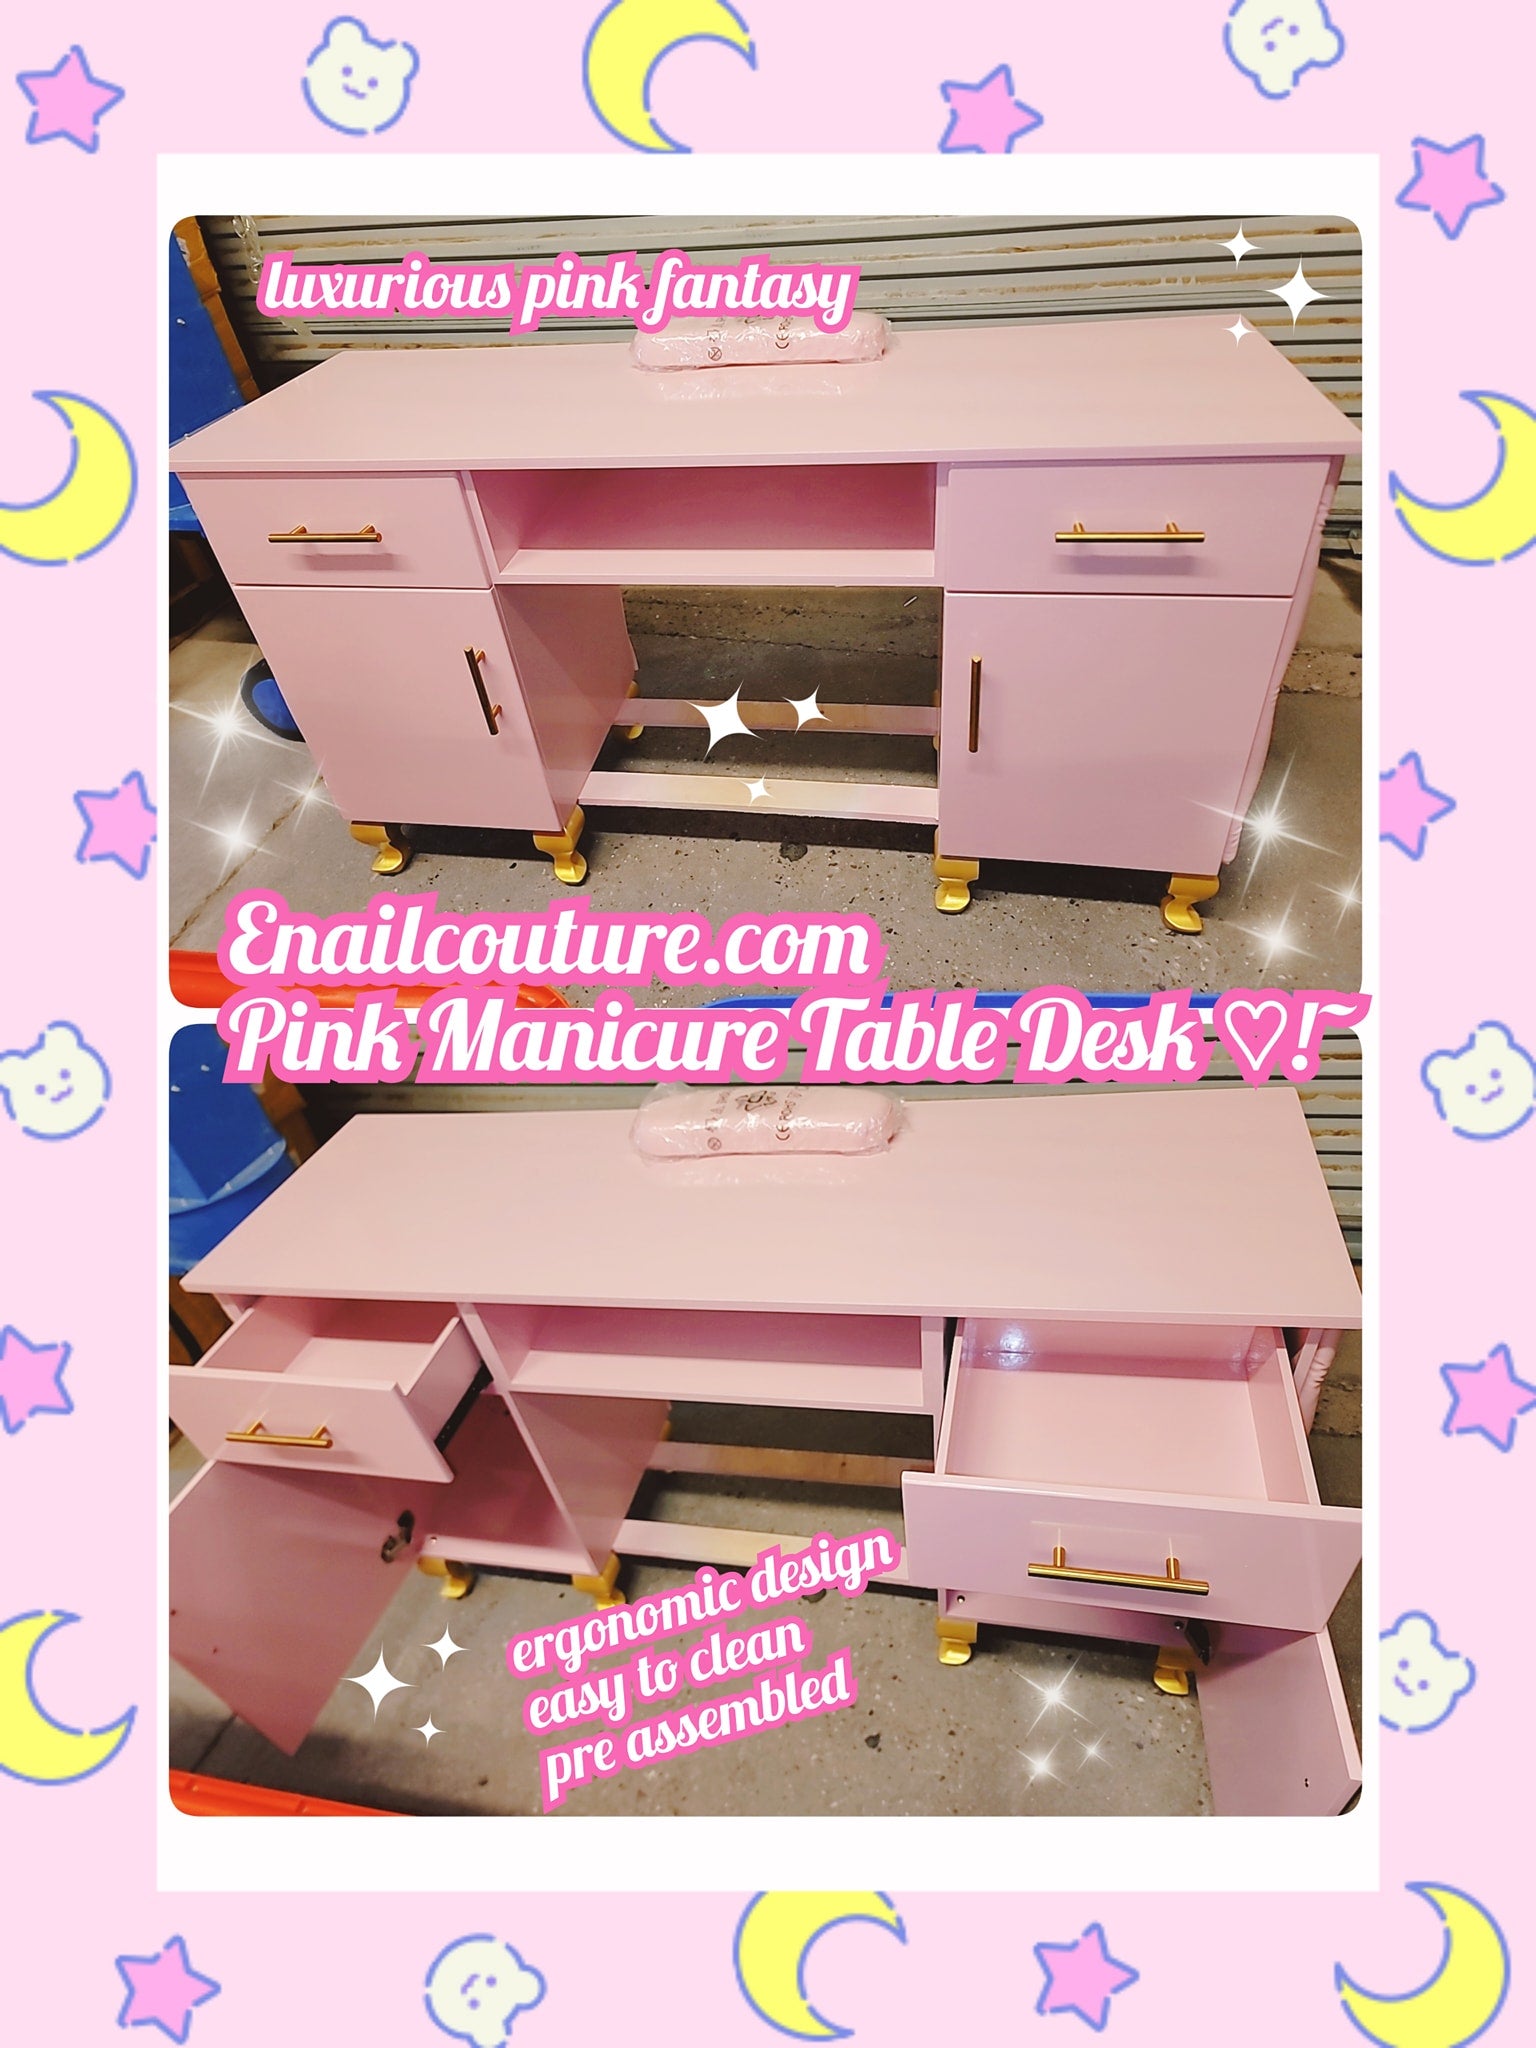 Pink Manicure Table Desk! (Manicure Table, Nail Makeup Desk with